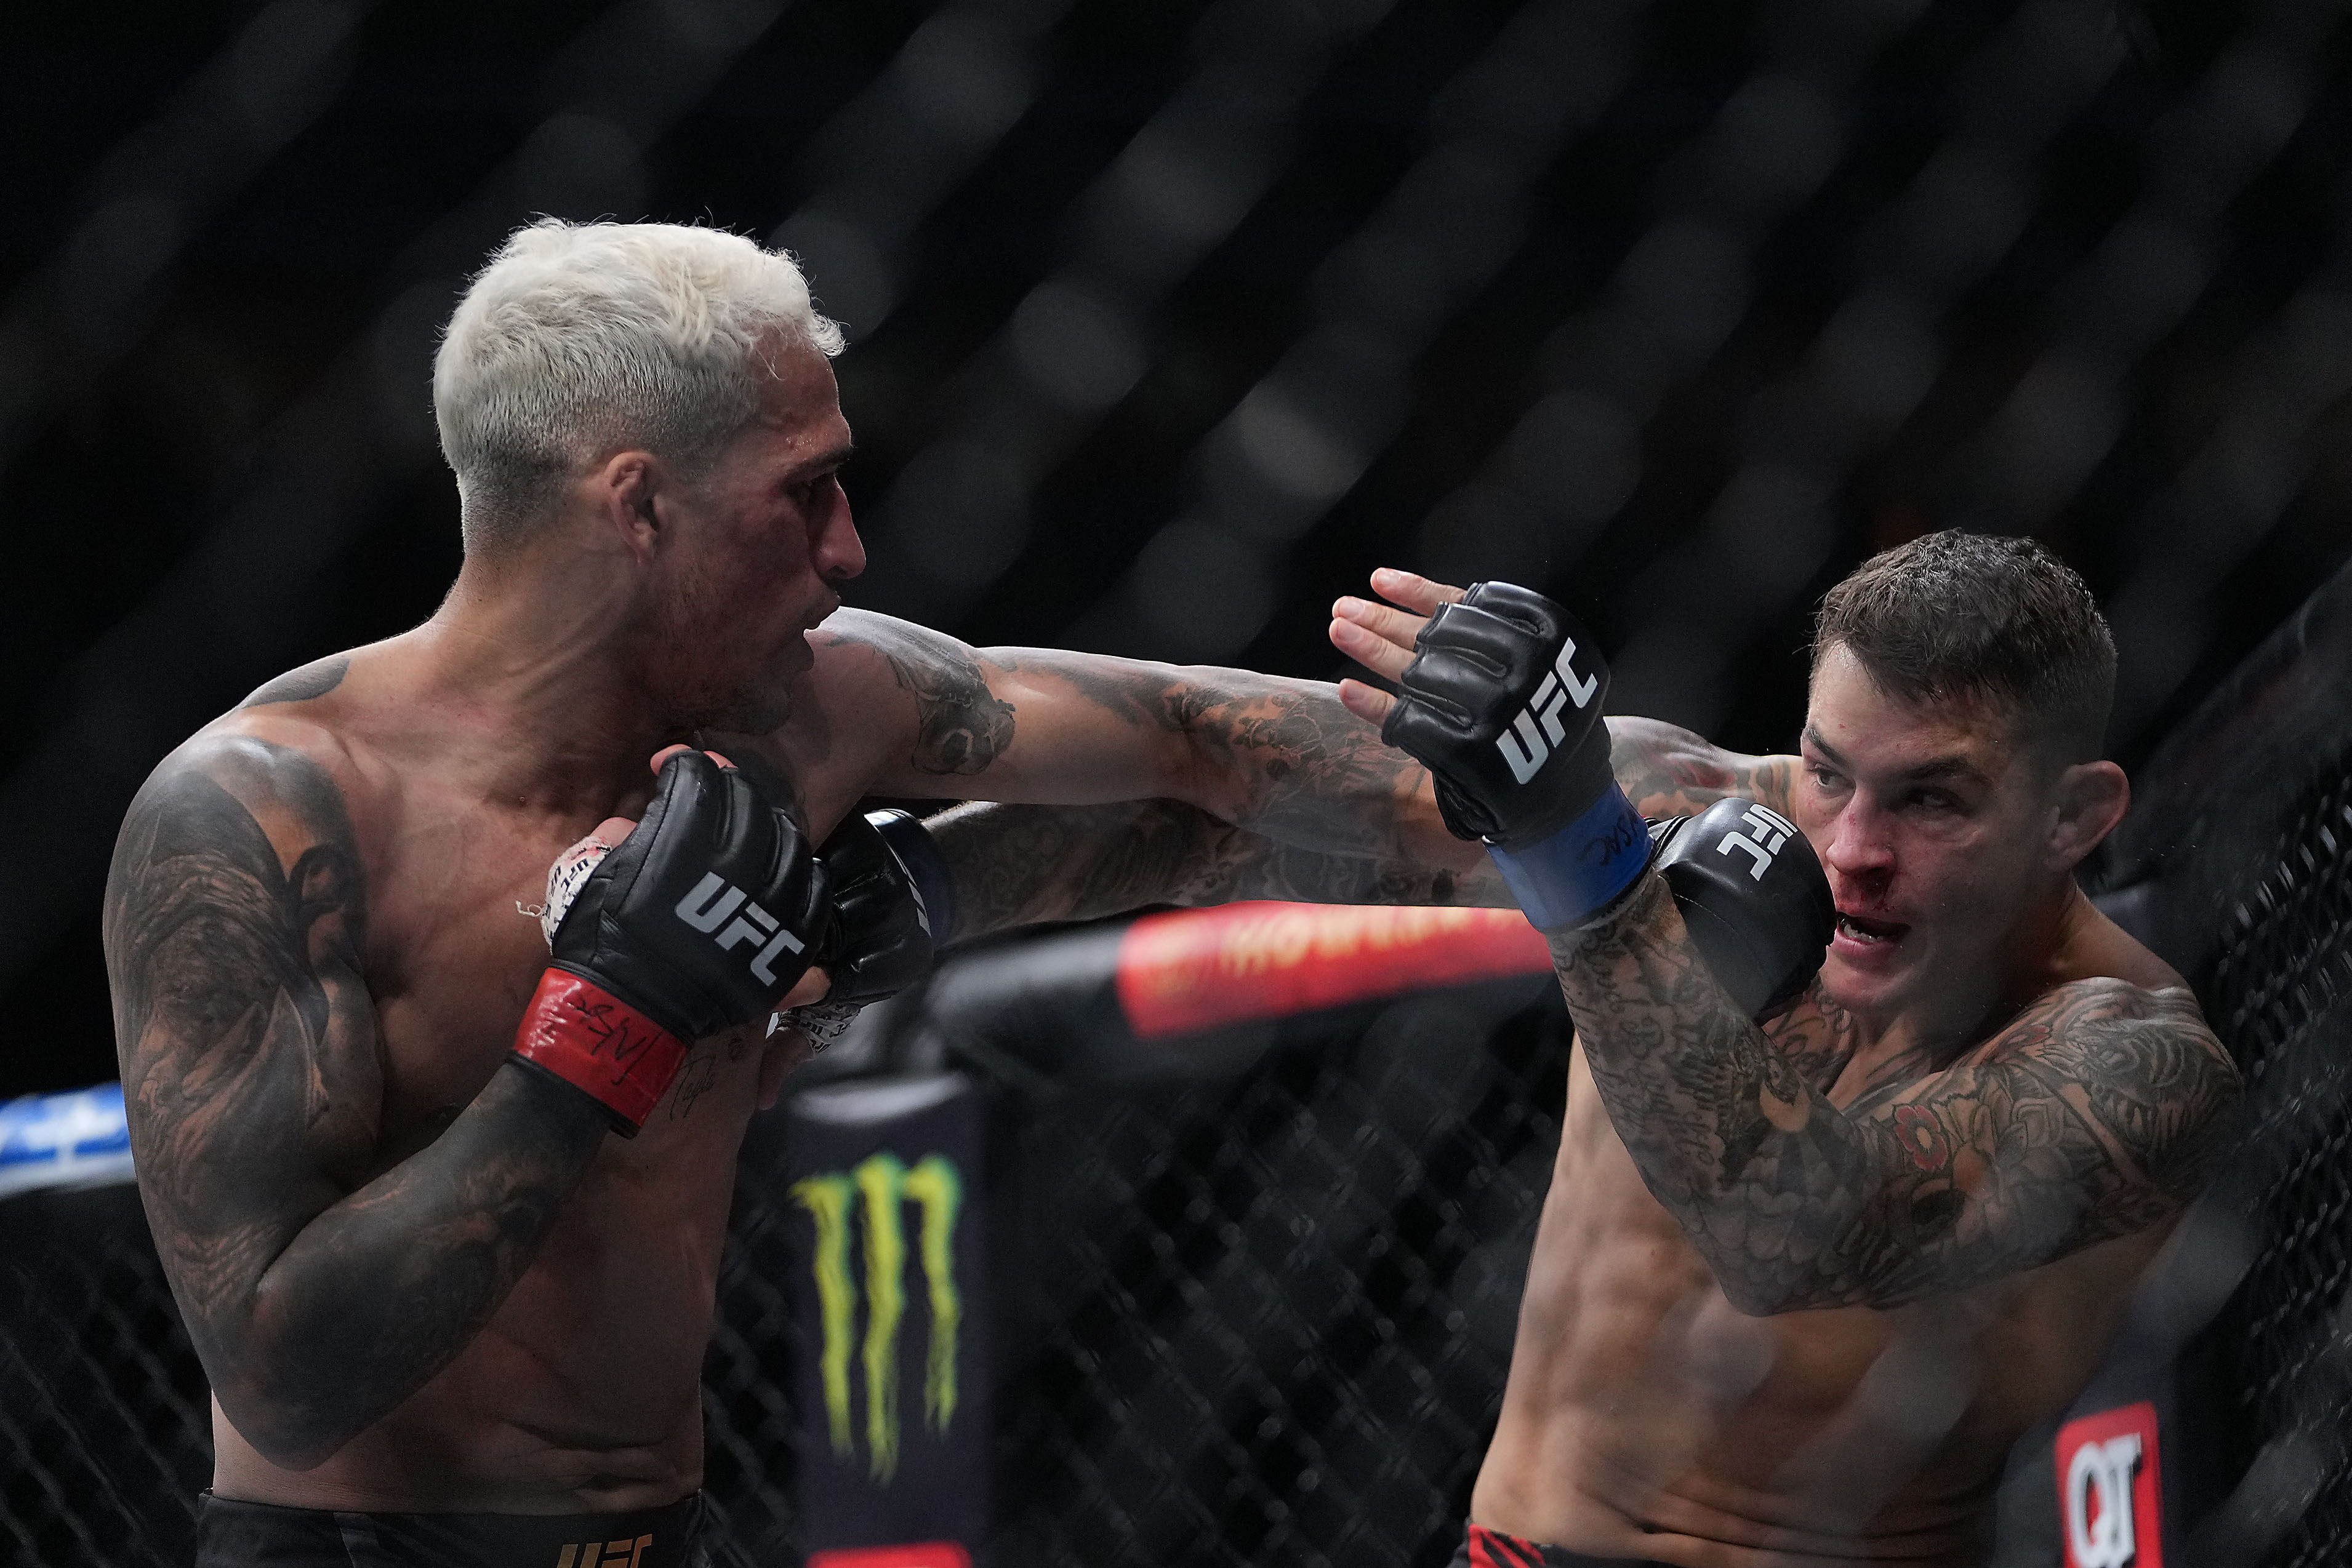 Charles Oliveira moves in with a hit against Dustin Poirier at UFC 269. Photo: Stephen R Sylvanie/USA TODAY Sports